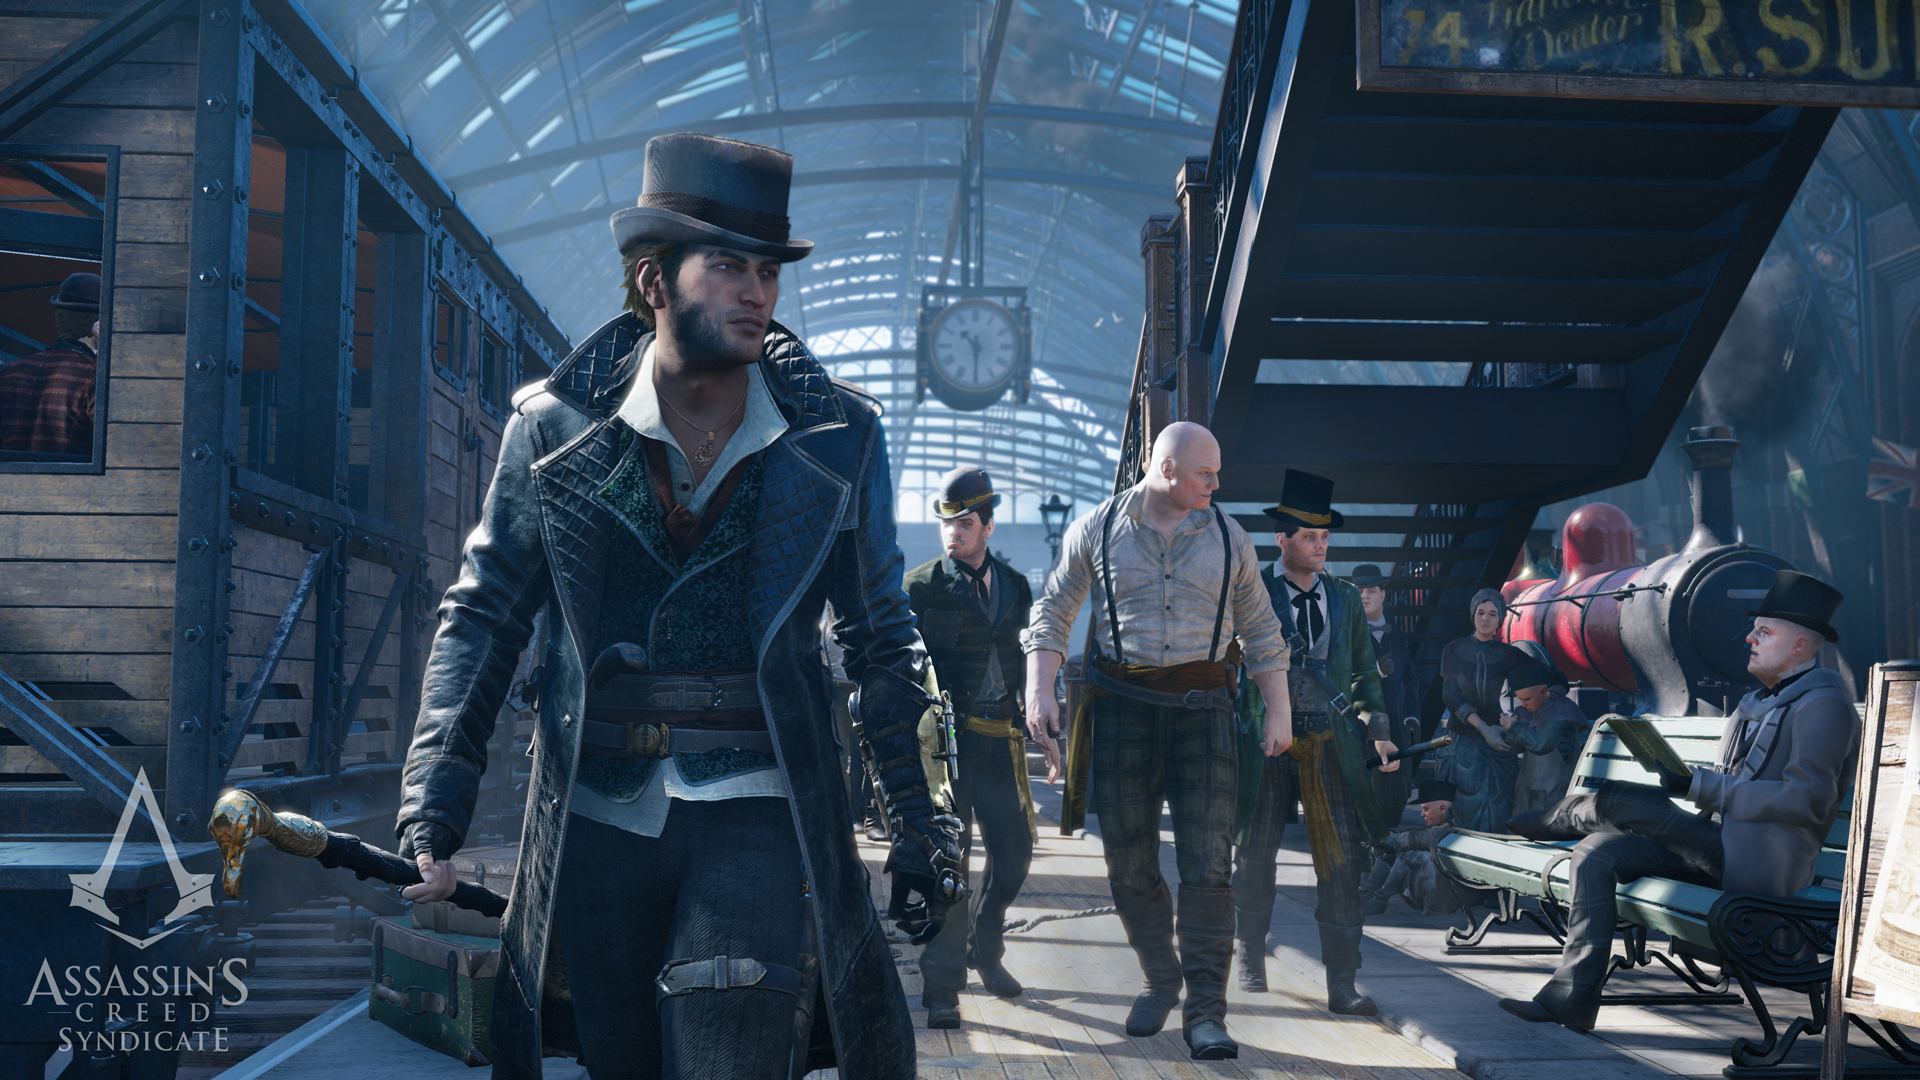 Find the best laptops for Assassin's Creed Syndicate